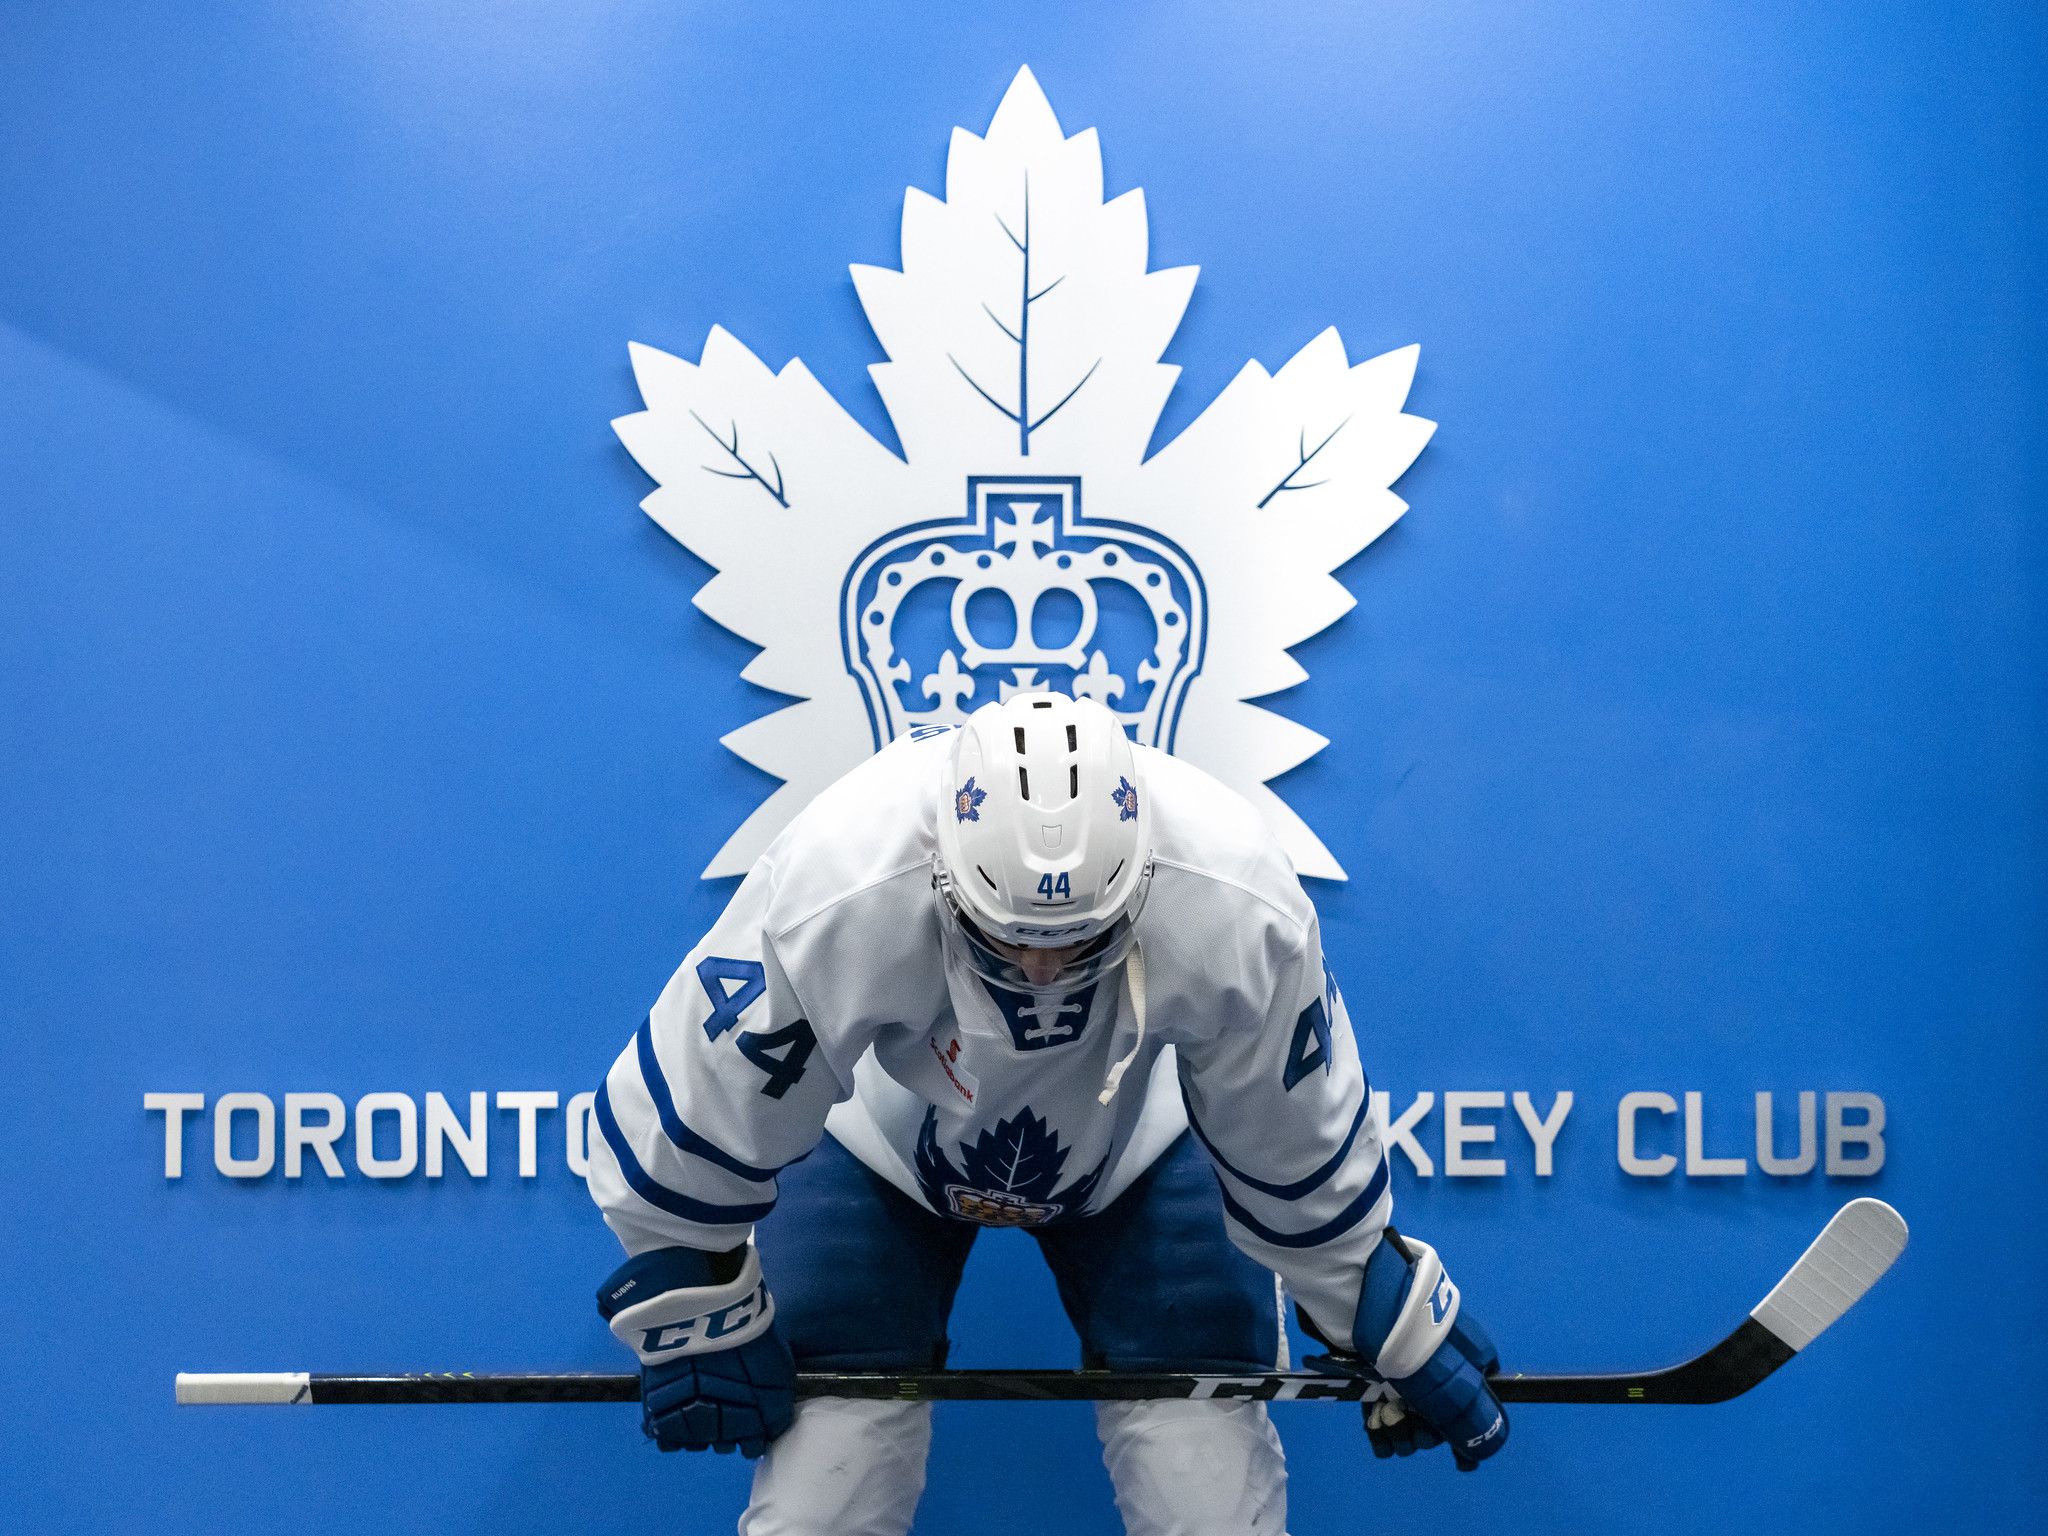 Toronto Marlies: 2019 20 Season Review And A Look Ahead To 2021. Maple Leafs Hotstove